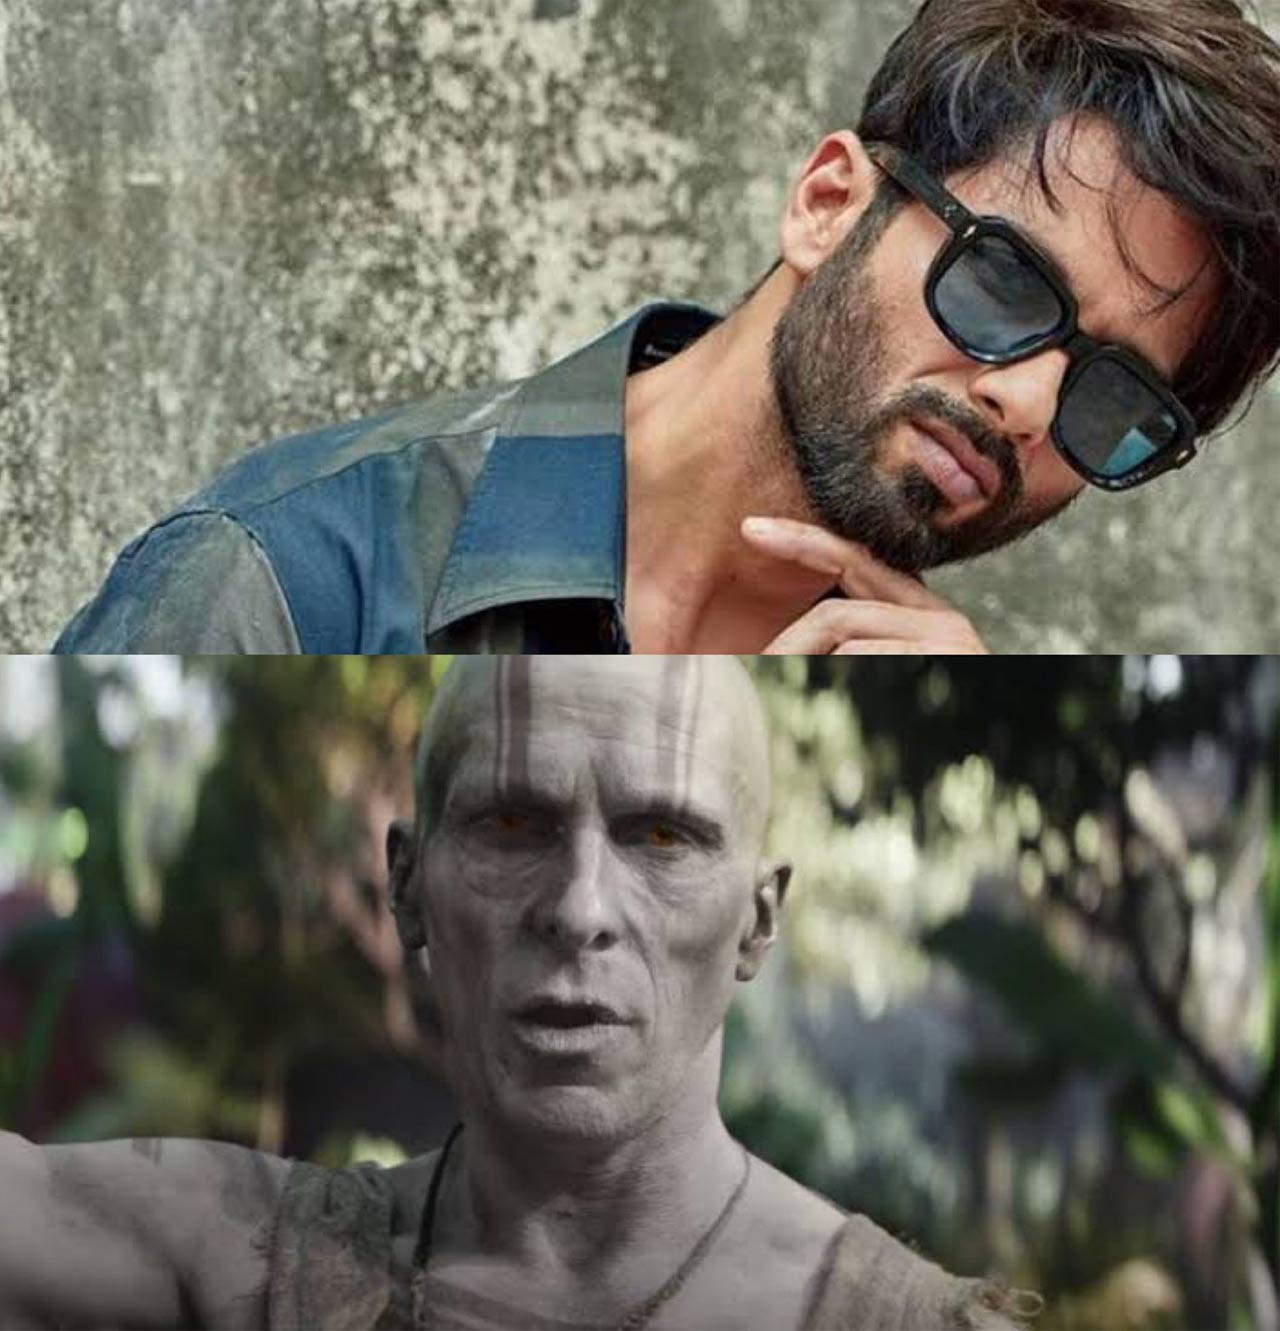 Gorr was a pious character who then transformed into a despicable villain. Shahid Kapoor's character in Haider also transformed from a positive note to a negative one which makes his journey similar to Gorr's making him the perfect choice for the role